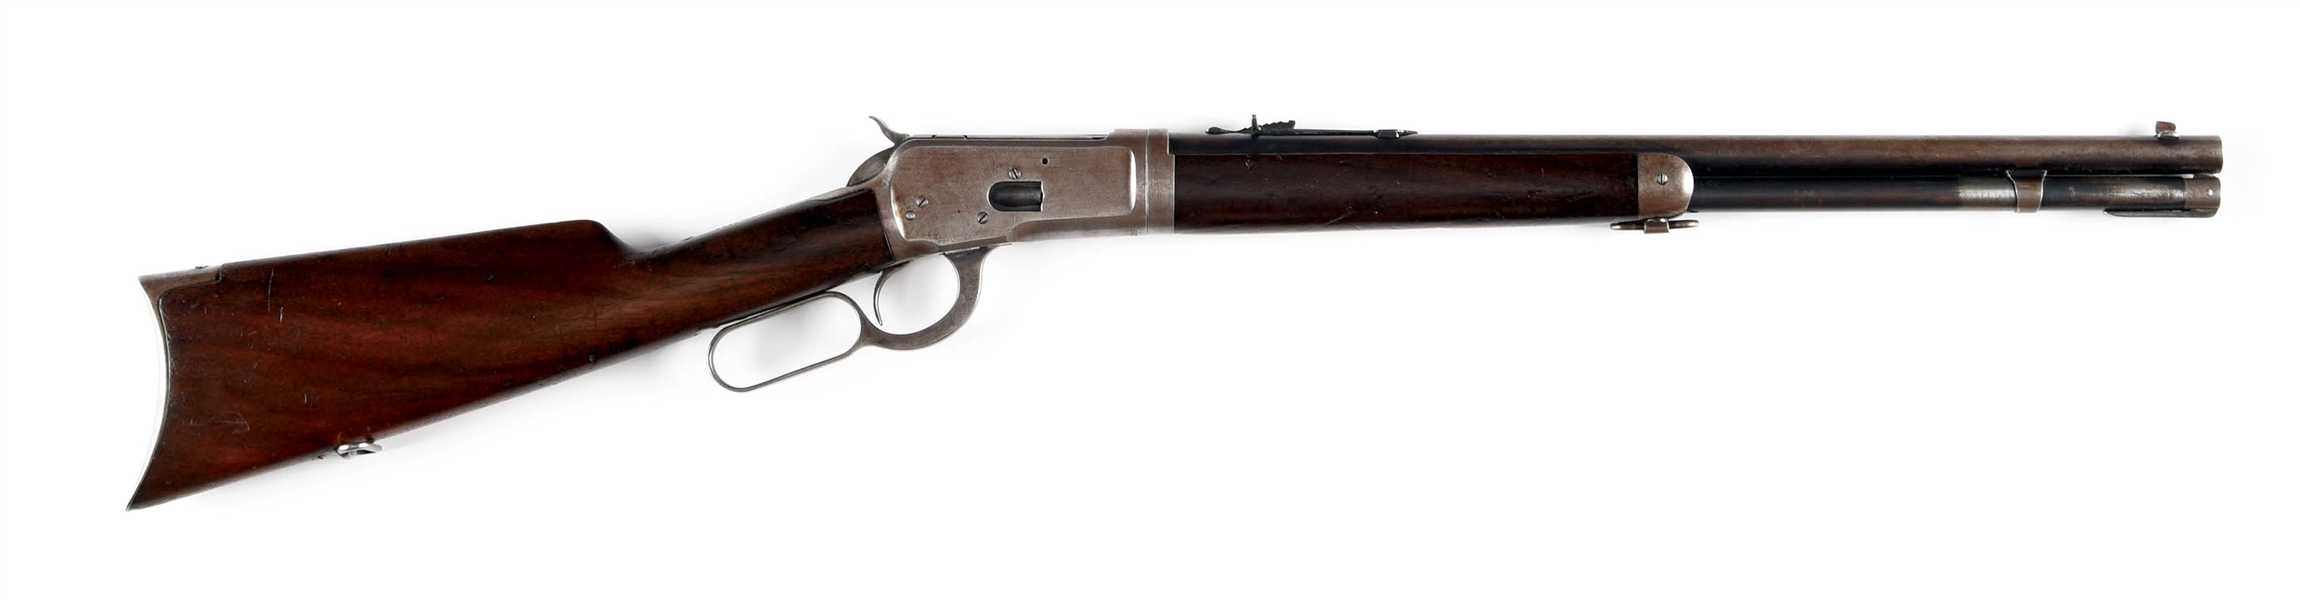 (C) SPECIAL ORDER WINCHESTER MODEL 1892 TAKEDOWN LEVER ACTION SHORT RIFLE (1918).